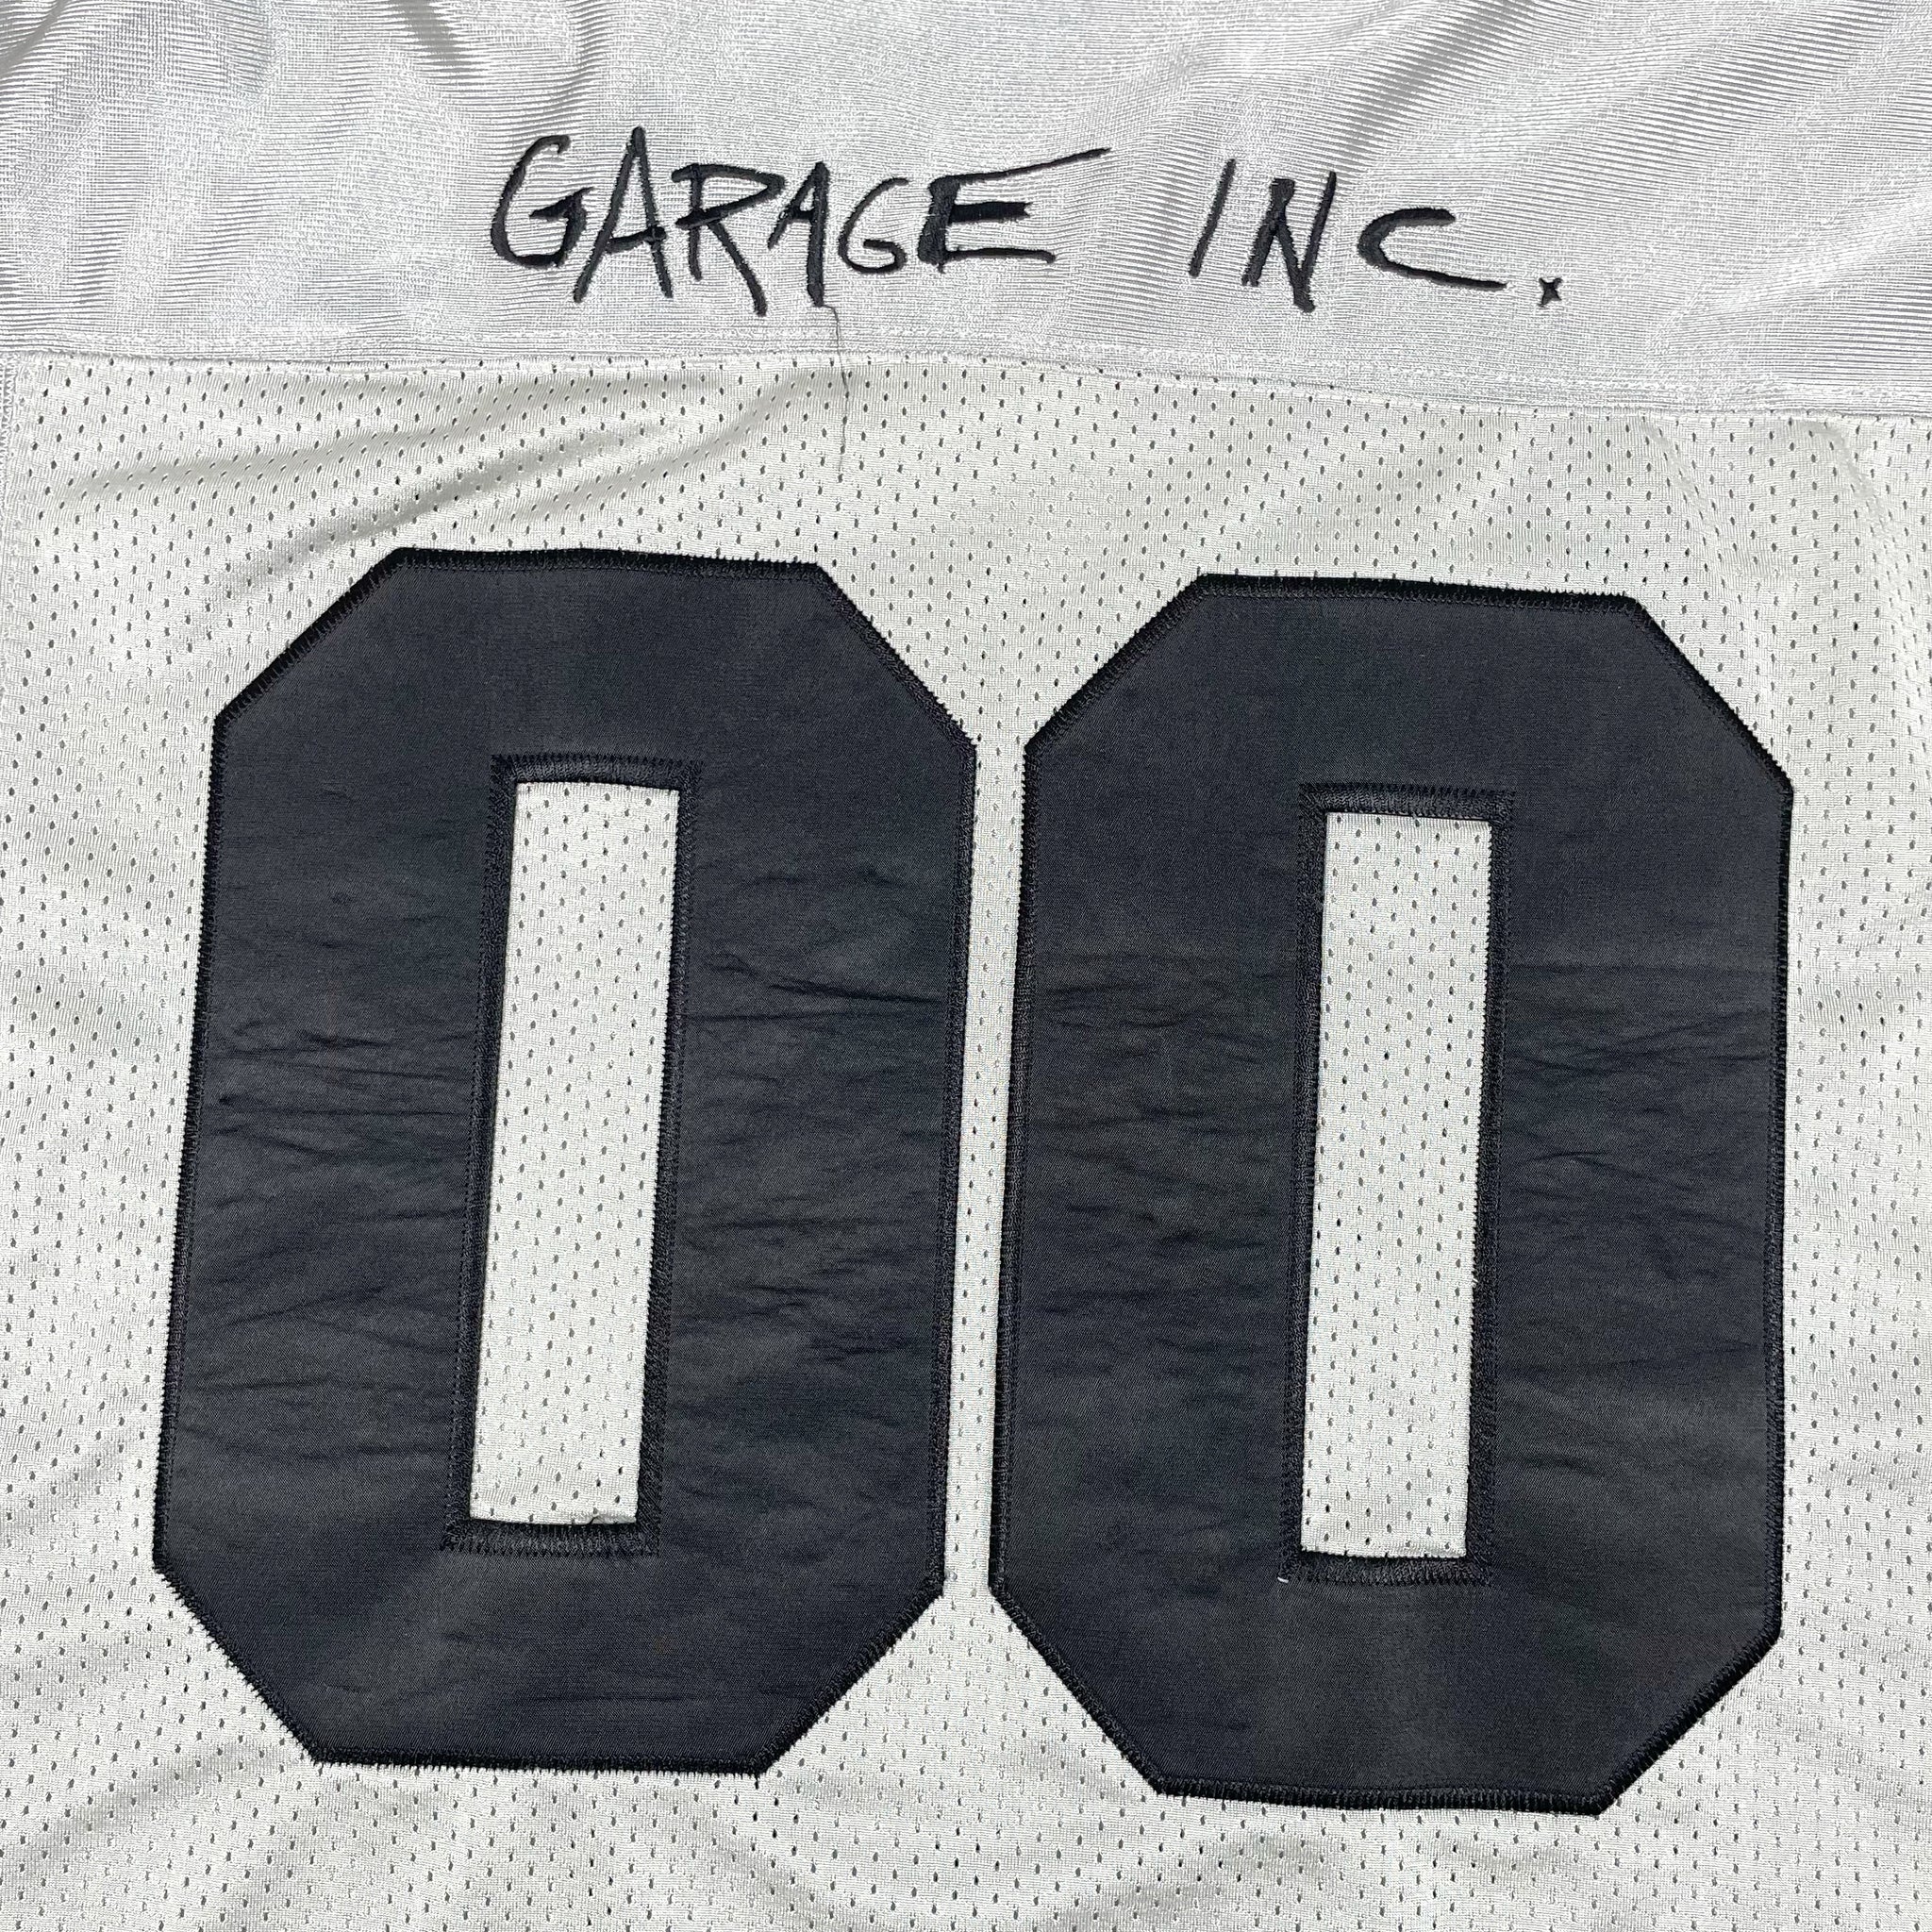 Limited edition Metallica Garage Inc. football jersey! for Sale in